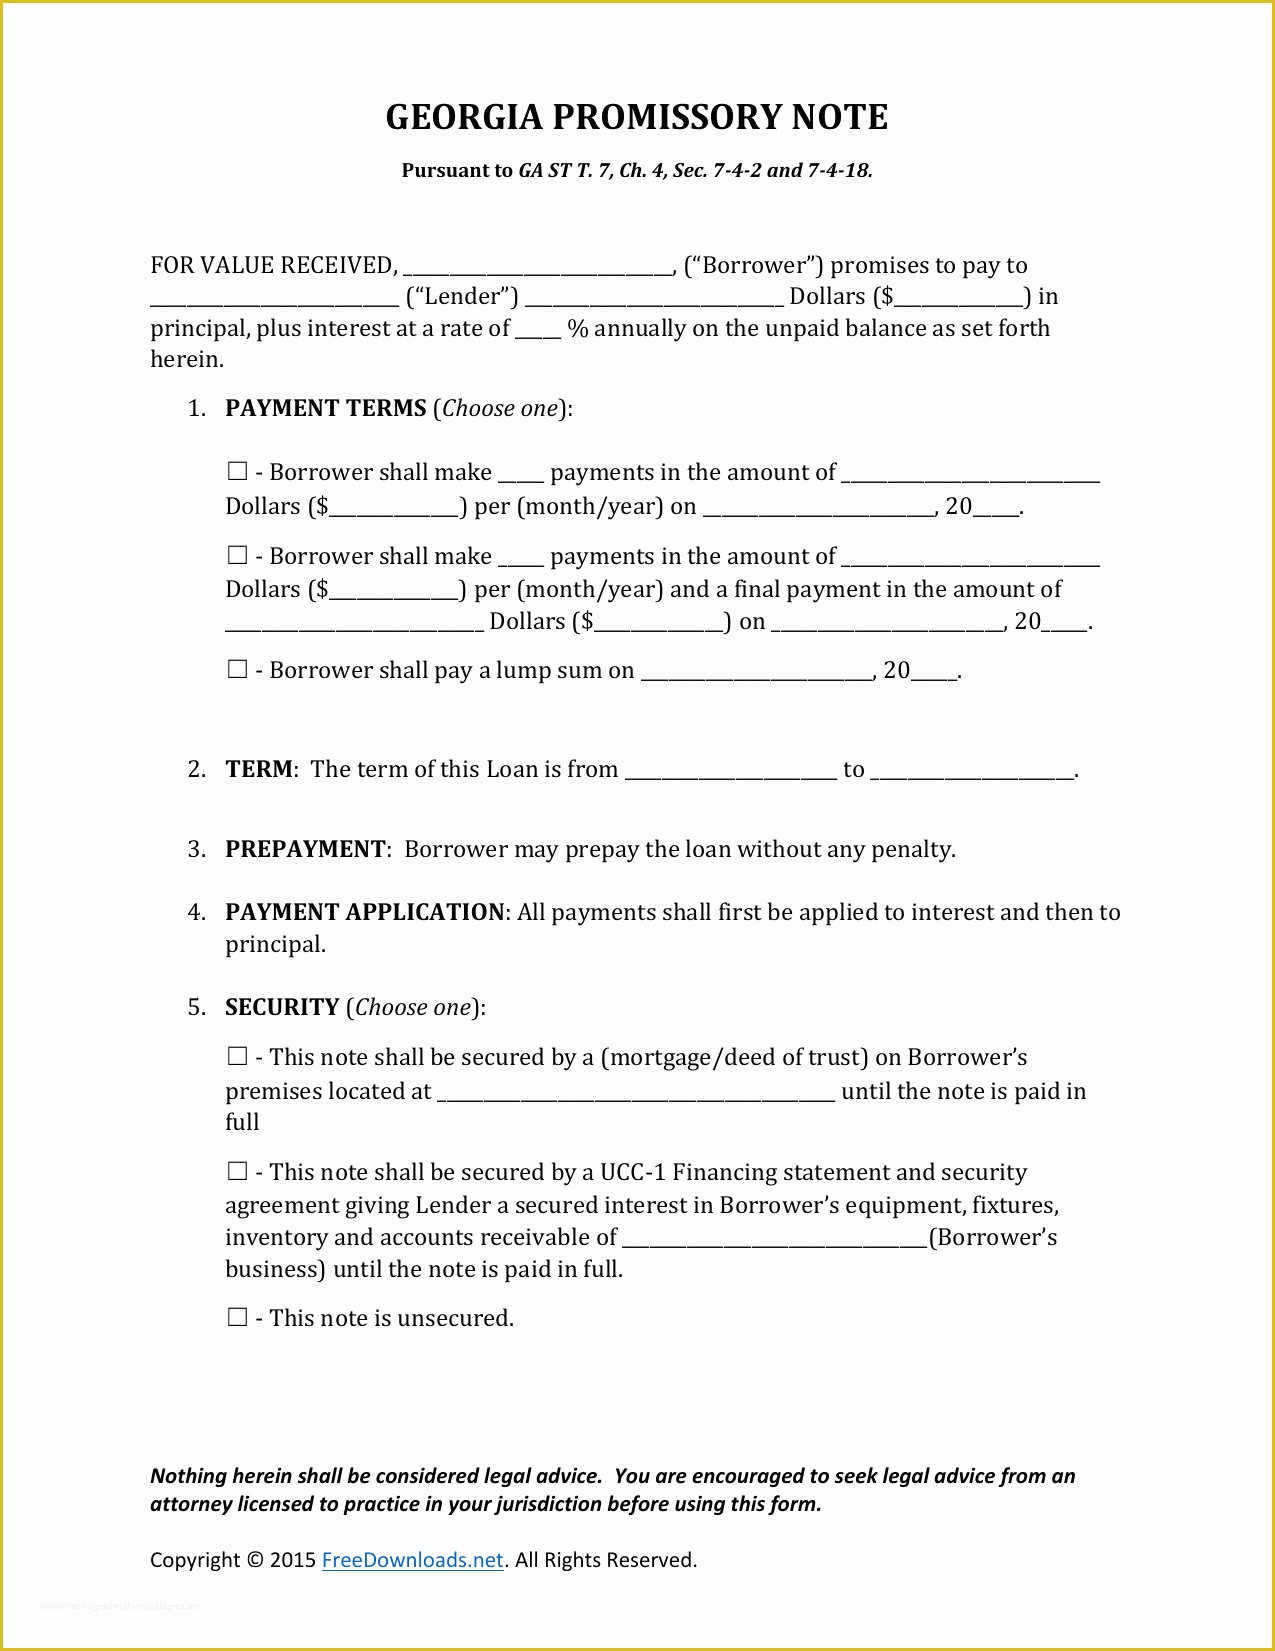 Promissory Note Free Template Download Of Download Georgia Promissory Note form Pdf Rtf